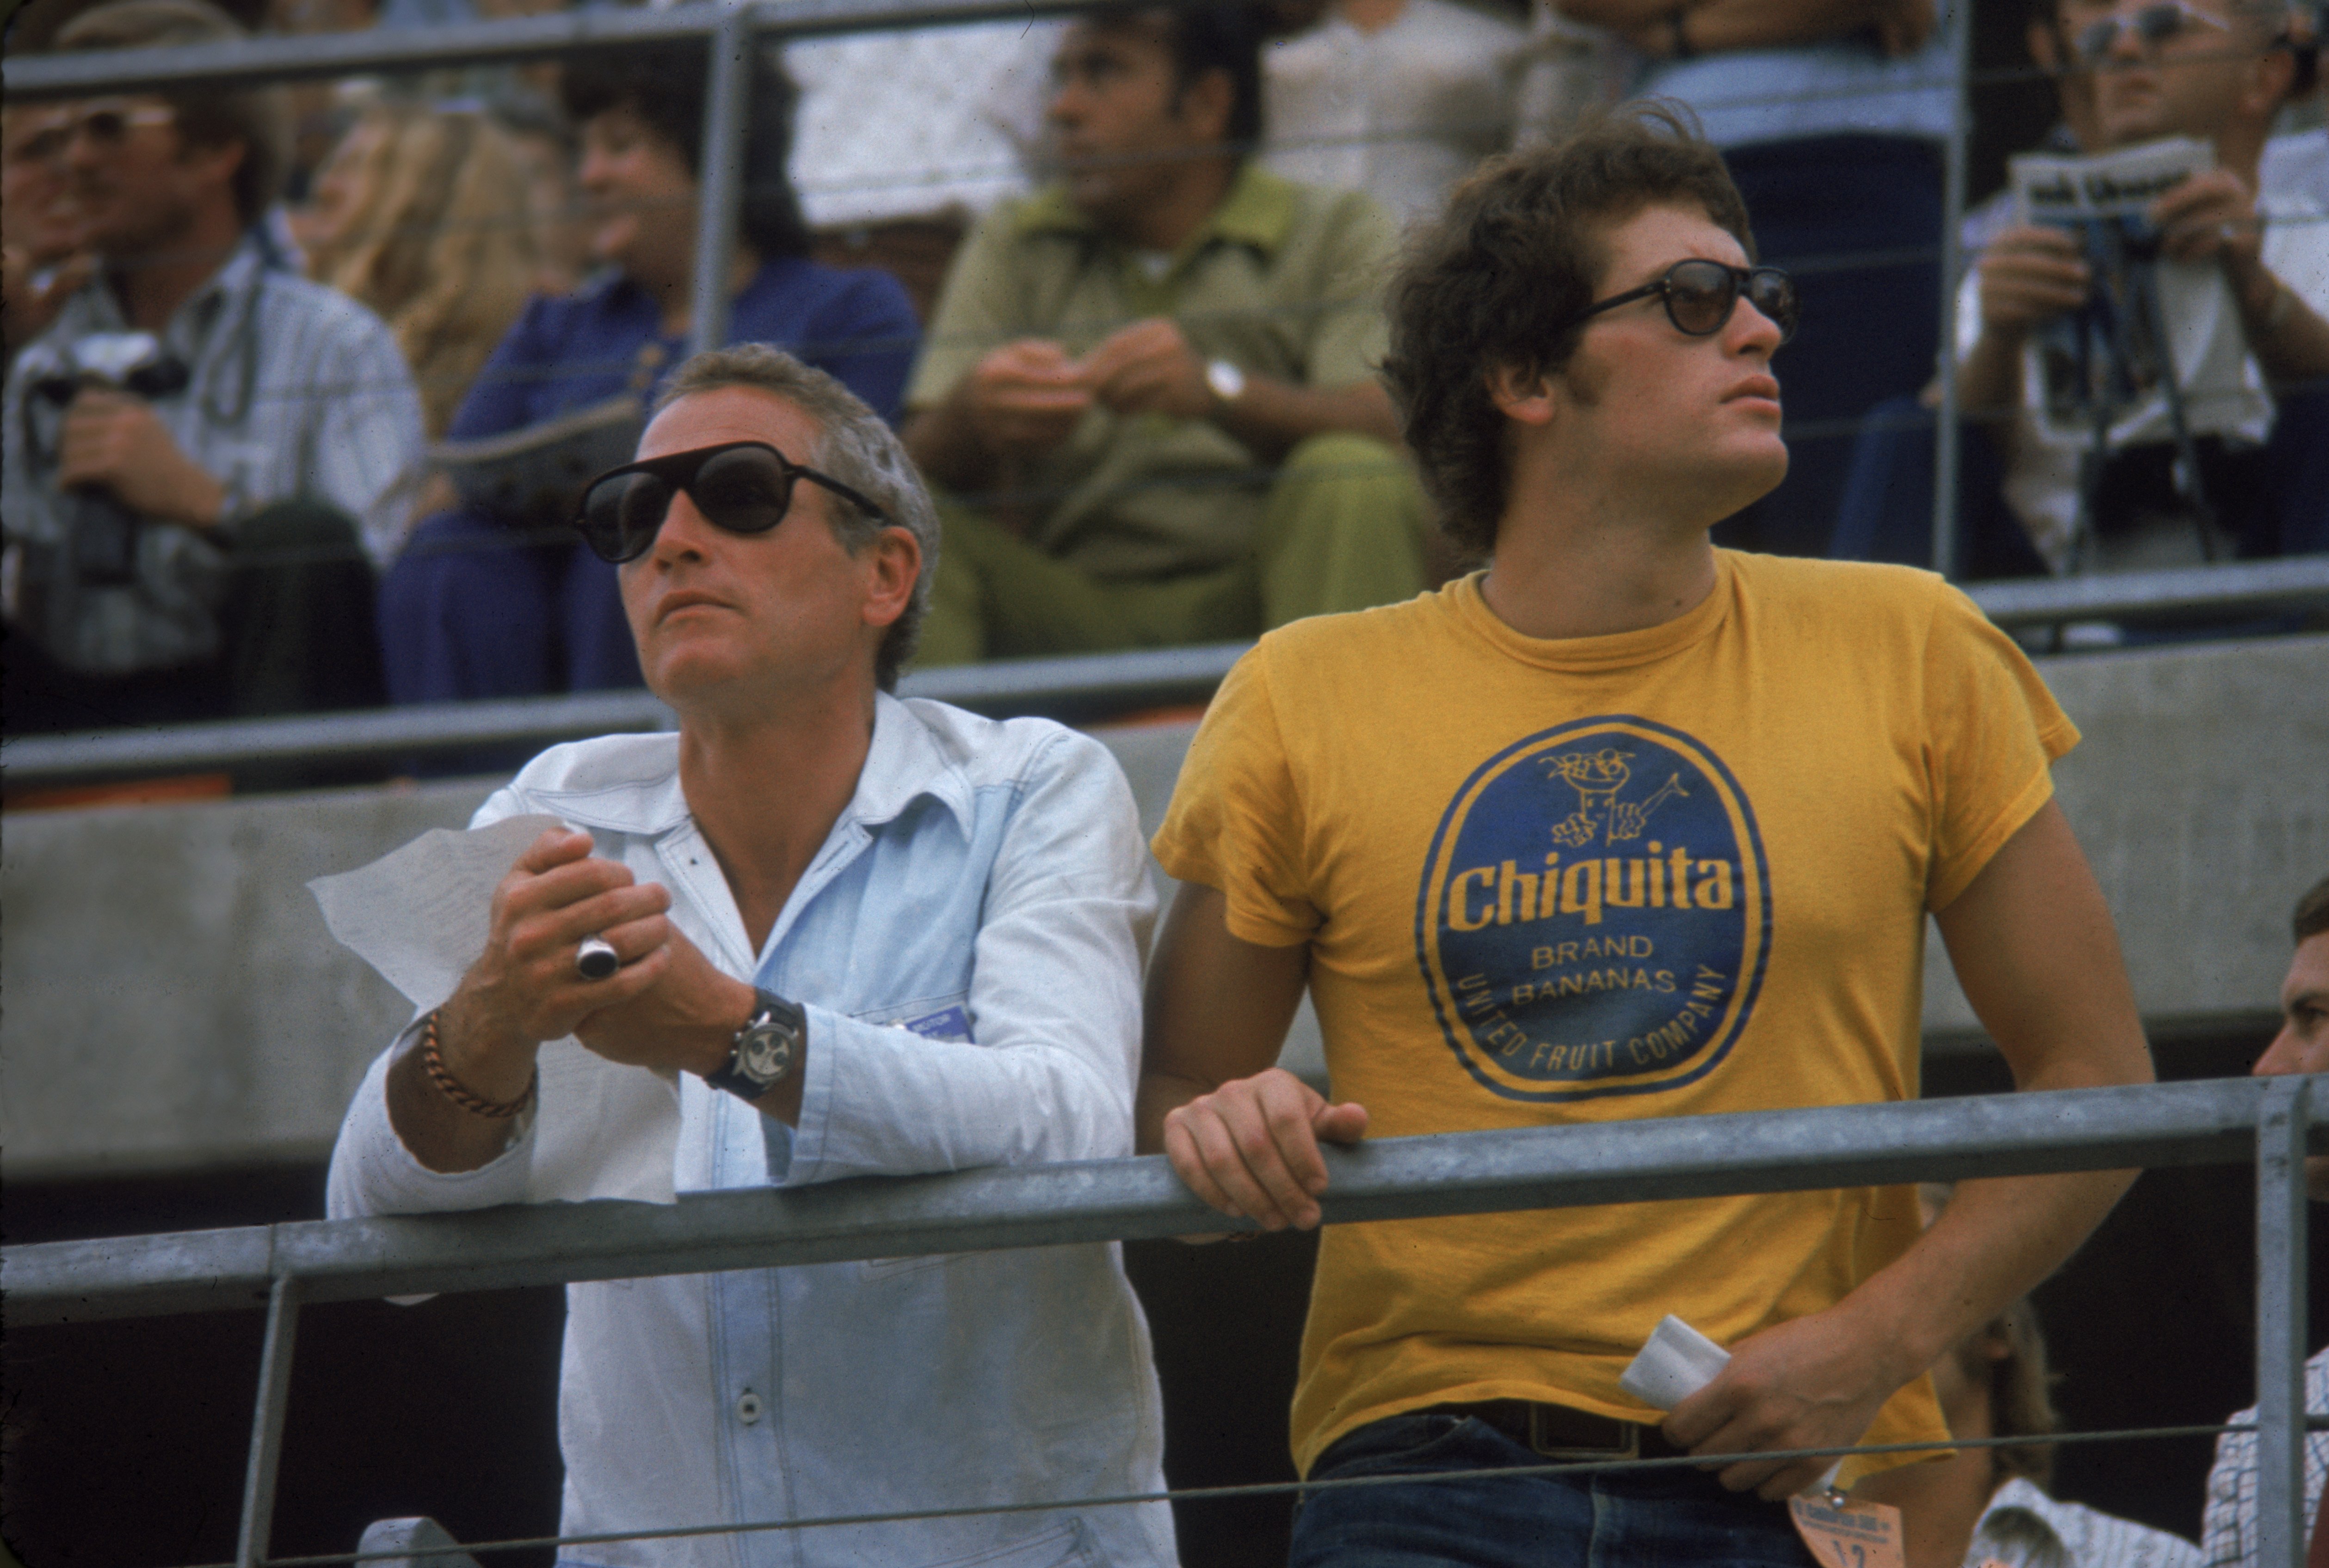 Paul Newman and his son Scott Newman during the Ontario 500 automobile race on September 3, 1972 in Ontario, California. | Source: Getty Images